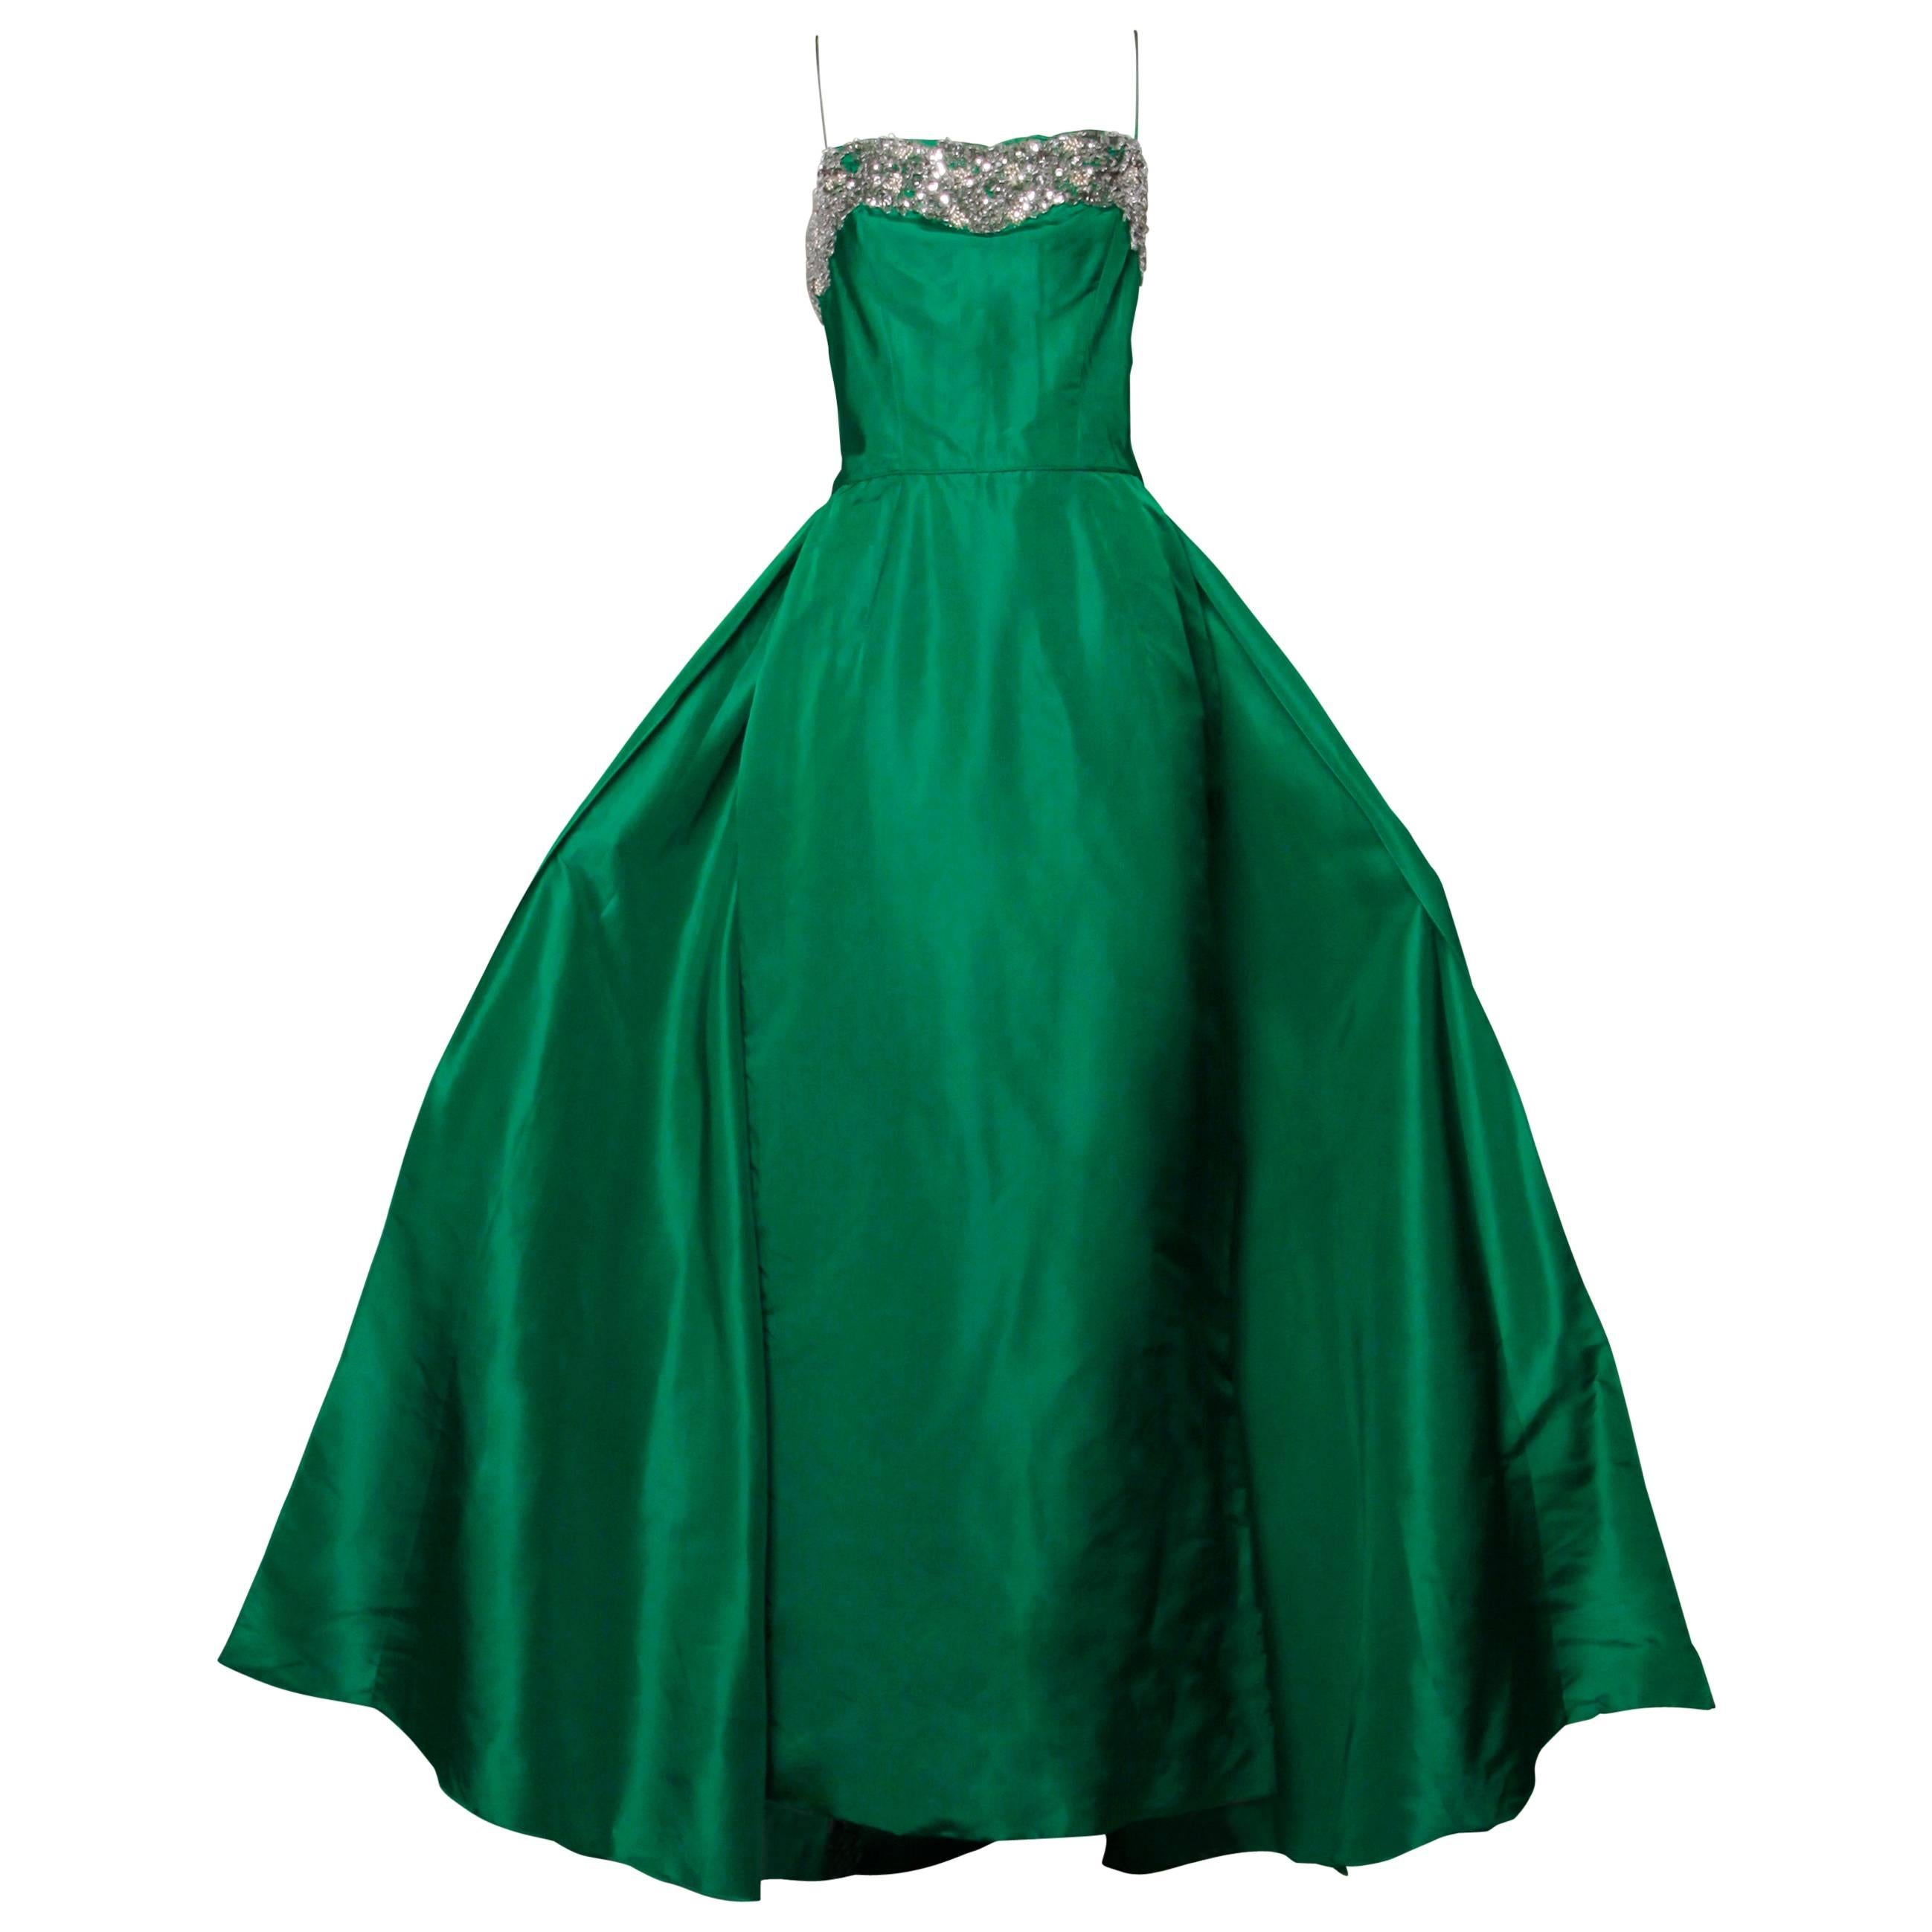 Incredible vintage 1950s formal gown in emerald green silk. The dress is fitted and features a massive back train, tiny nipped waist and beaded bust. Boned bodice, spaghetti straps and rear metal zip and hook closure. Fully lined. The dress has no